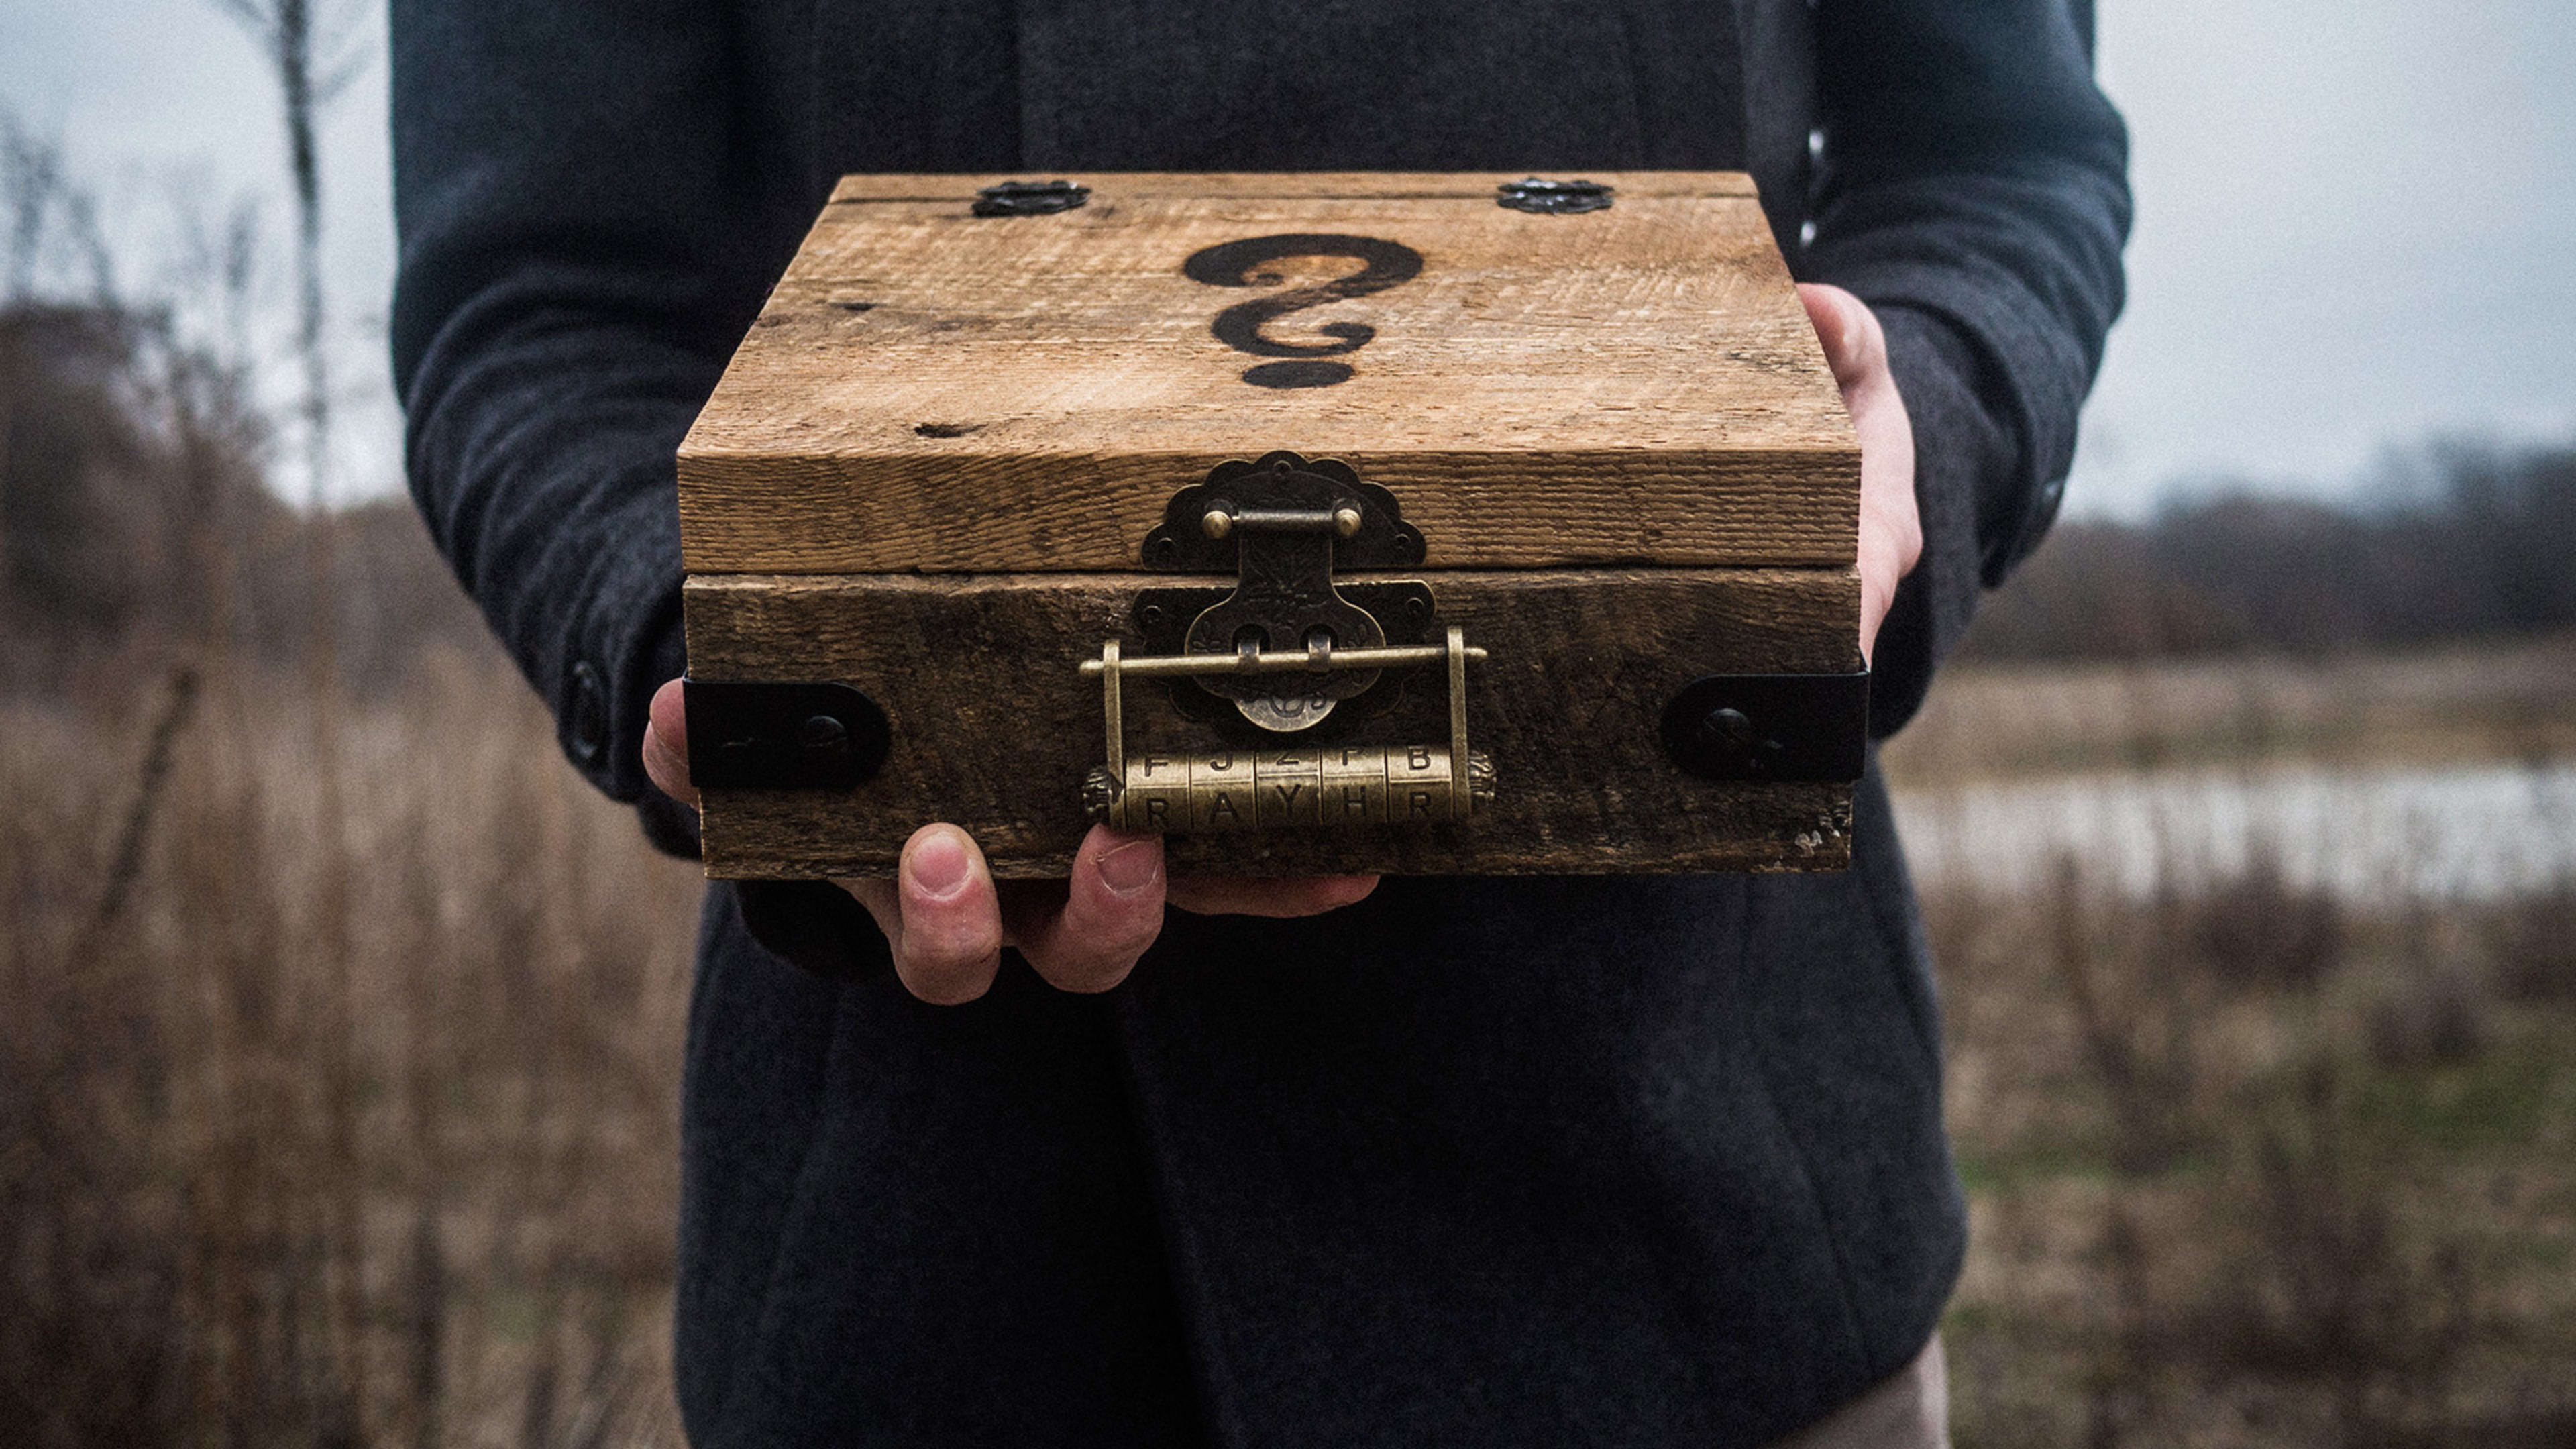 J.J. Abrams Creates Locked Mystery Boxes You Can Look Inside (Or